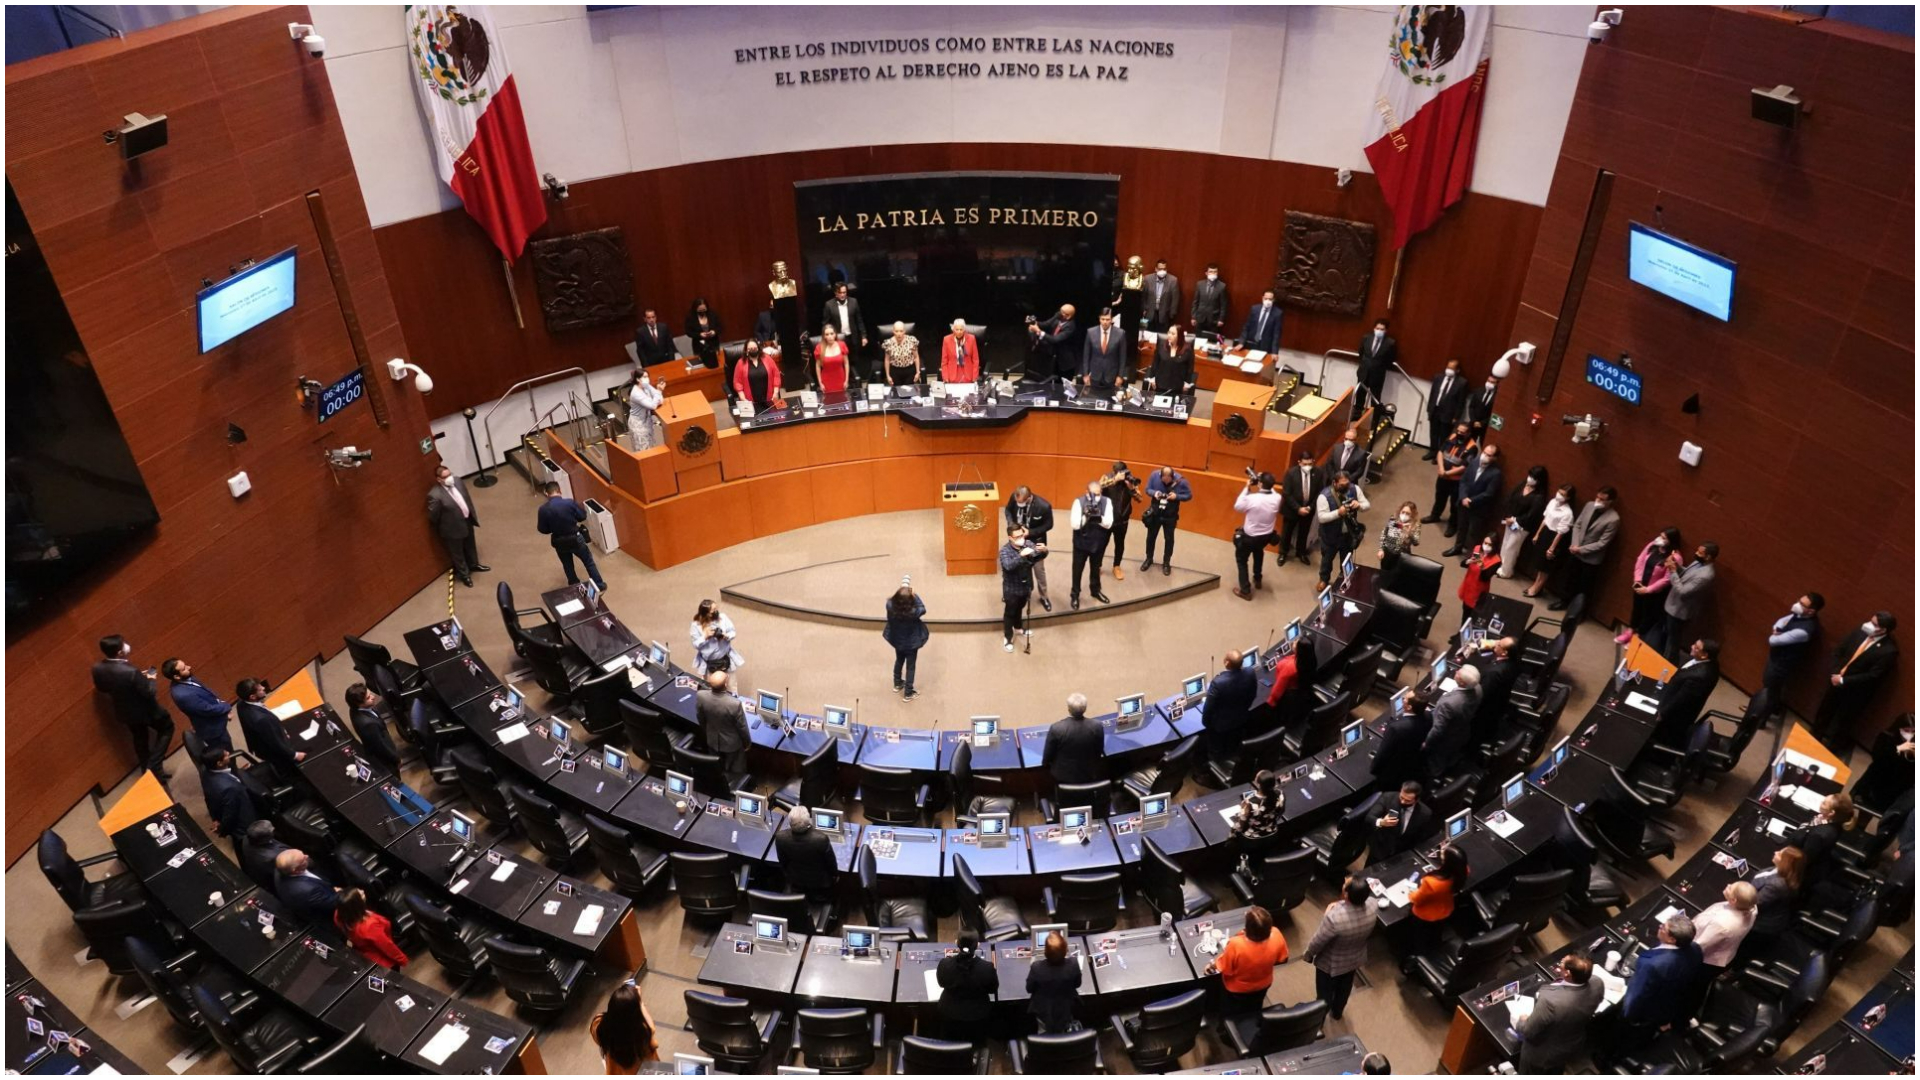 The Senate of the Republic is responsible for making the appointments (Photo: Cuartoscuro)